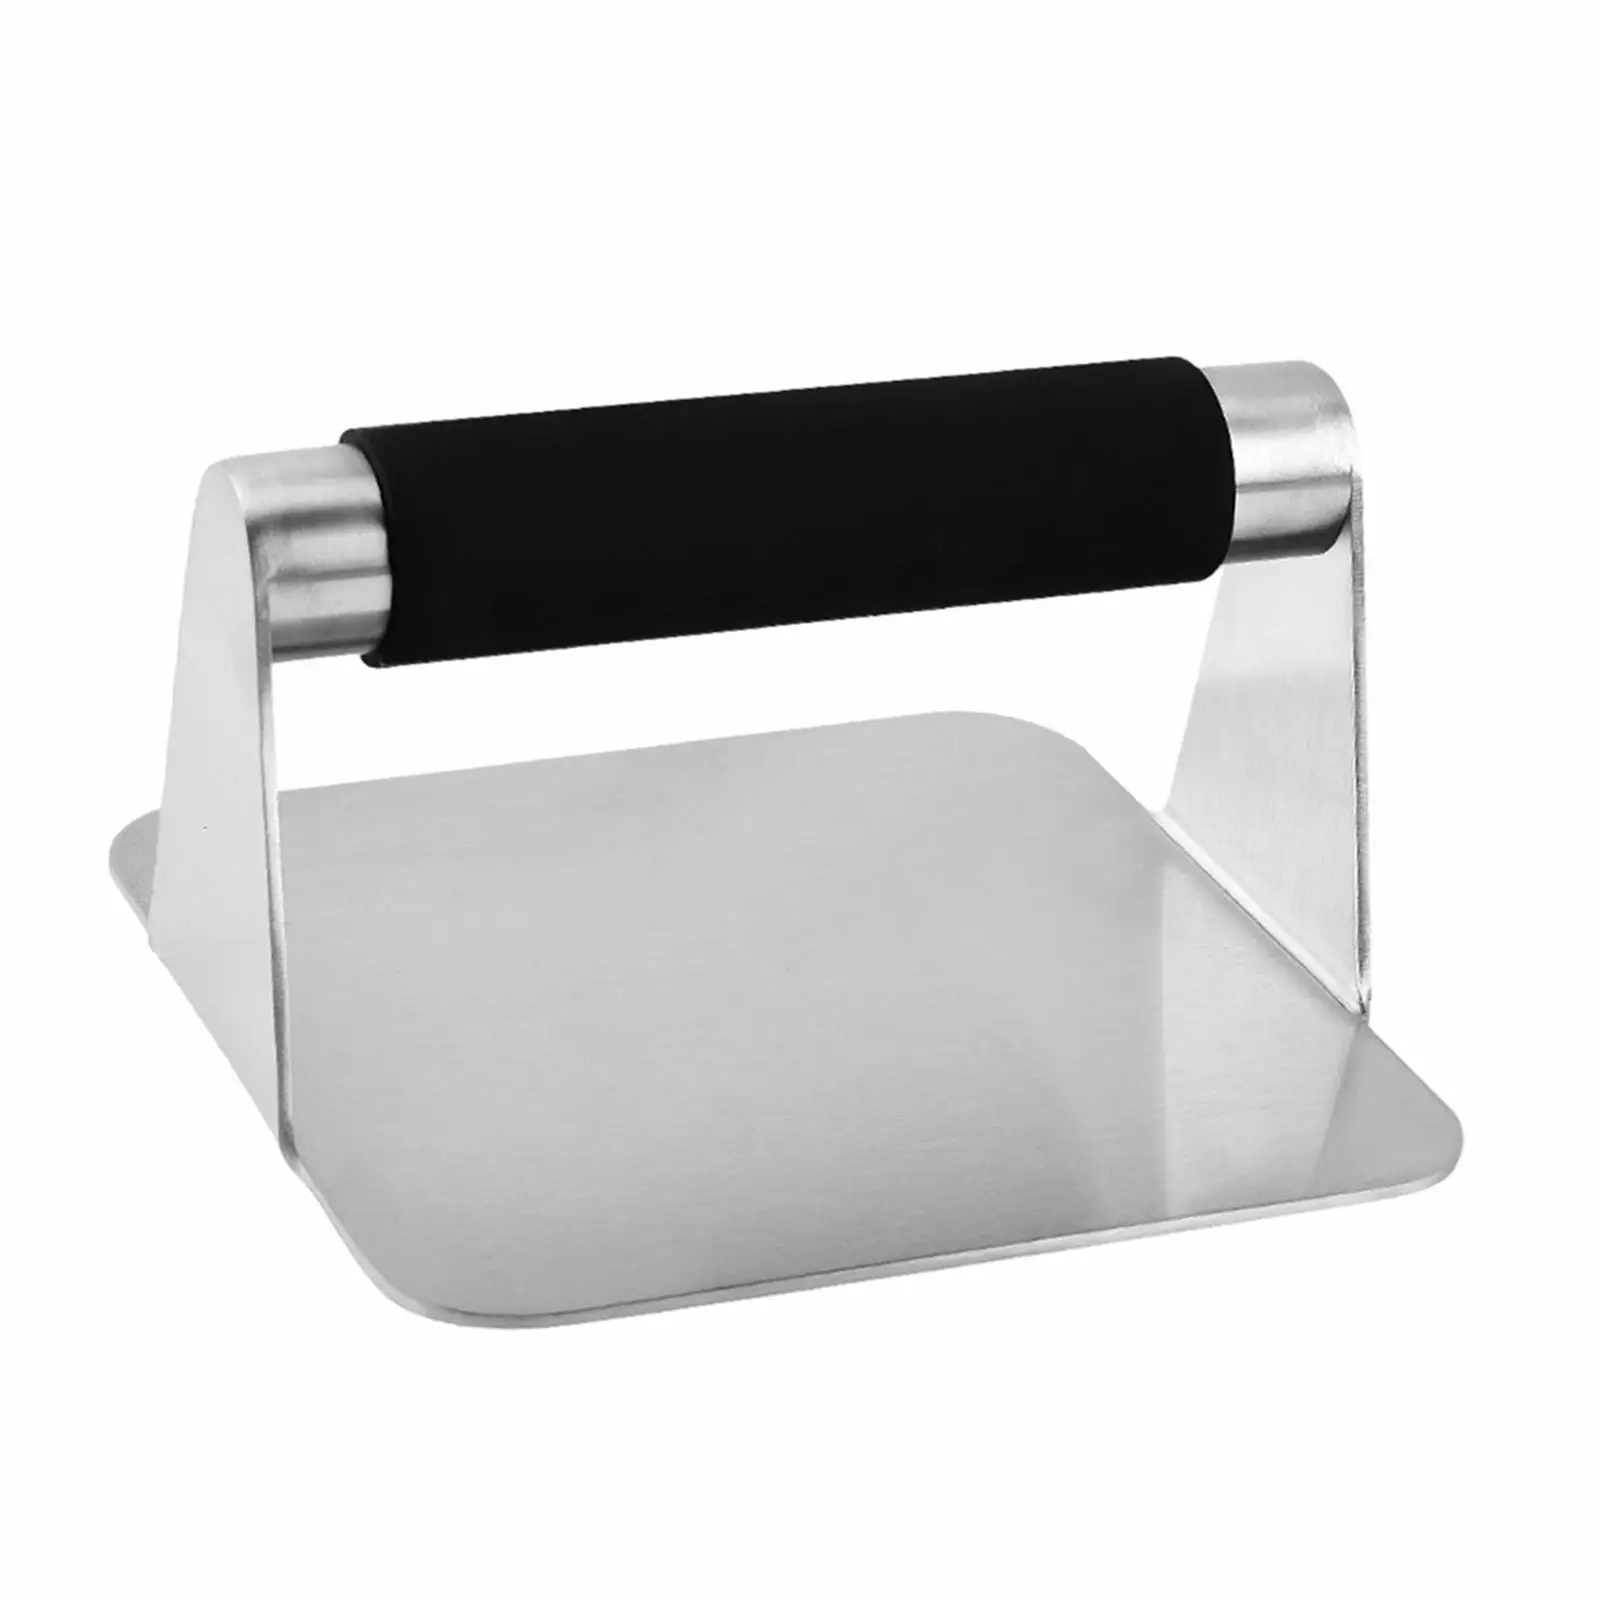 Stainless Steel Burger Press Nonstick Griddle Accessories Meat Steak Press Grill Press for Barbecue Sandwich Cooking Steaks